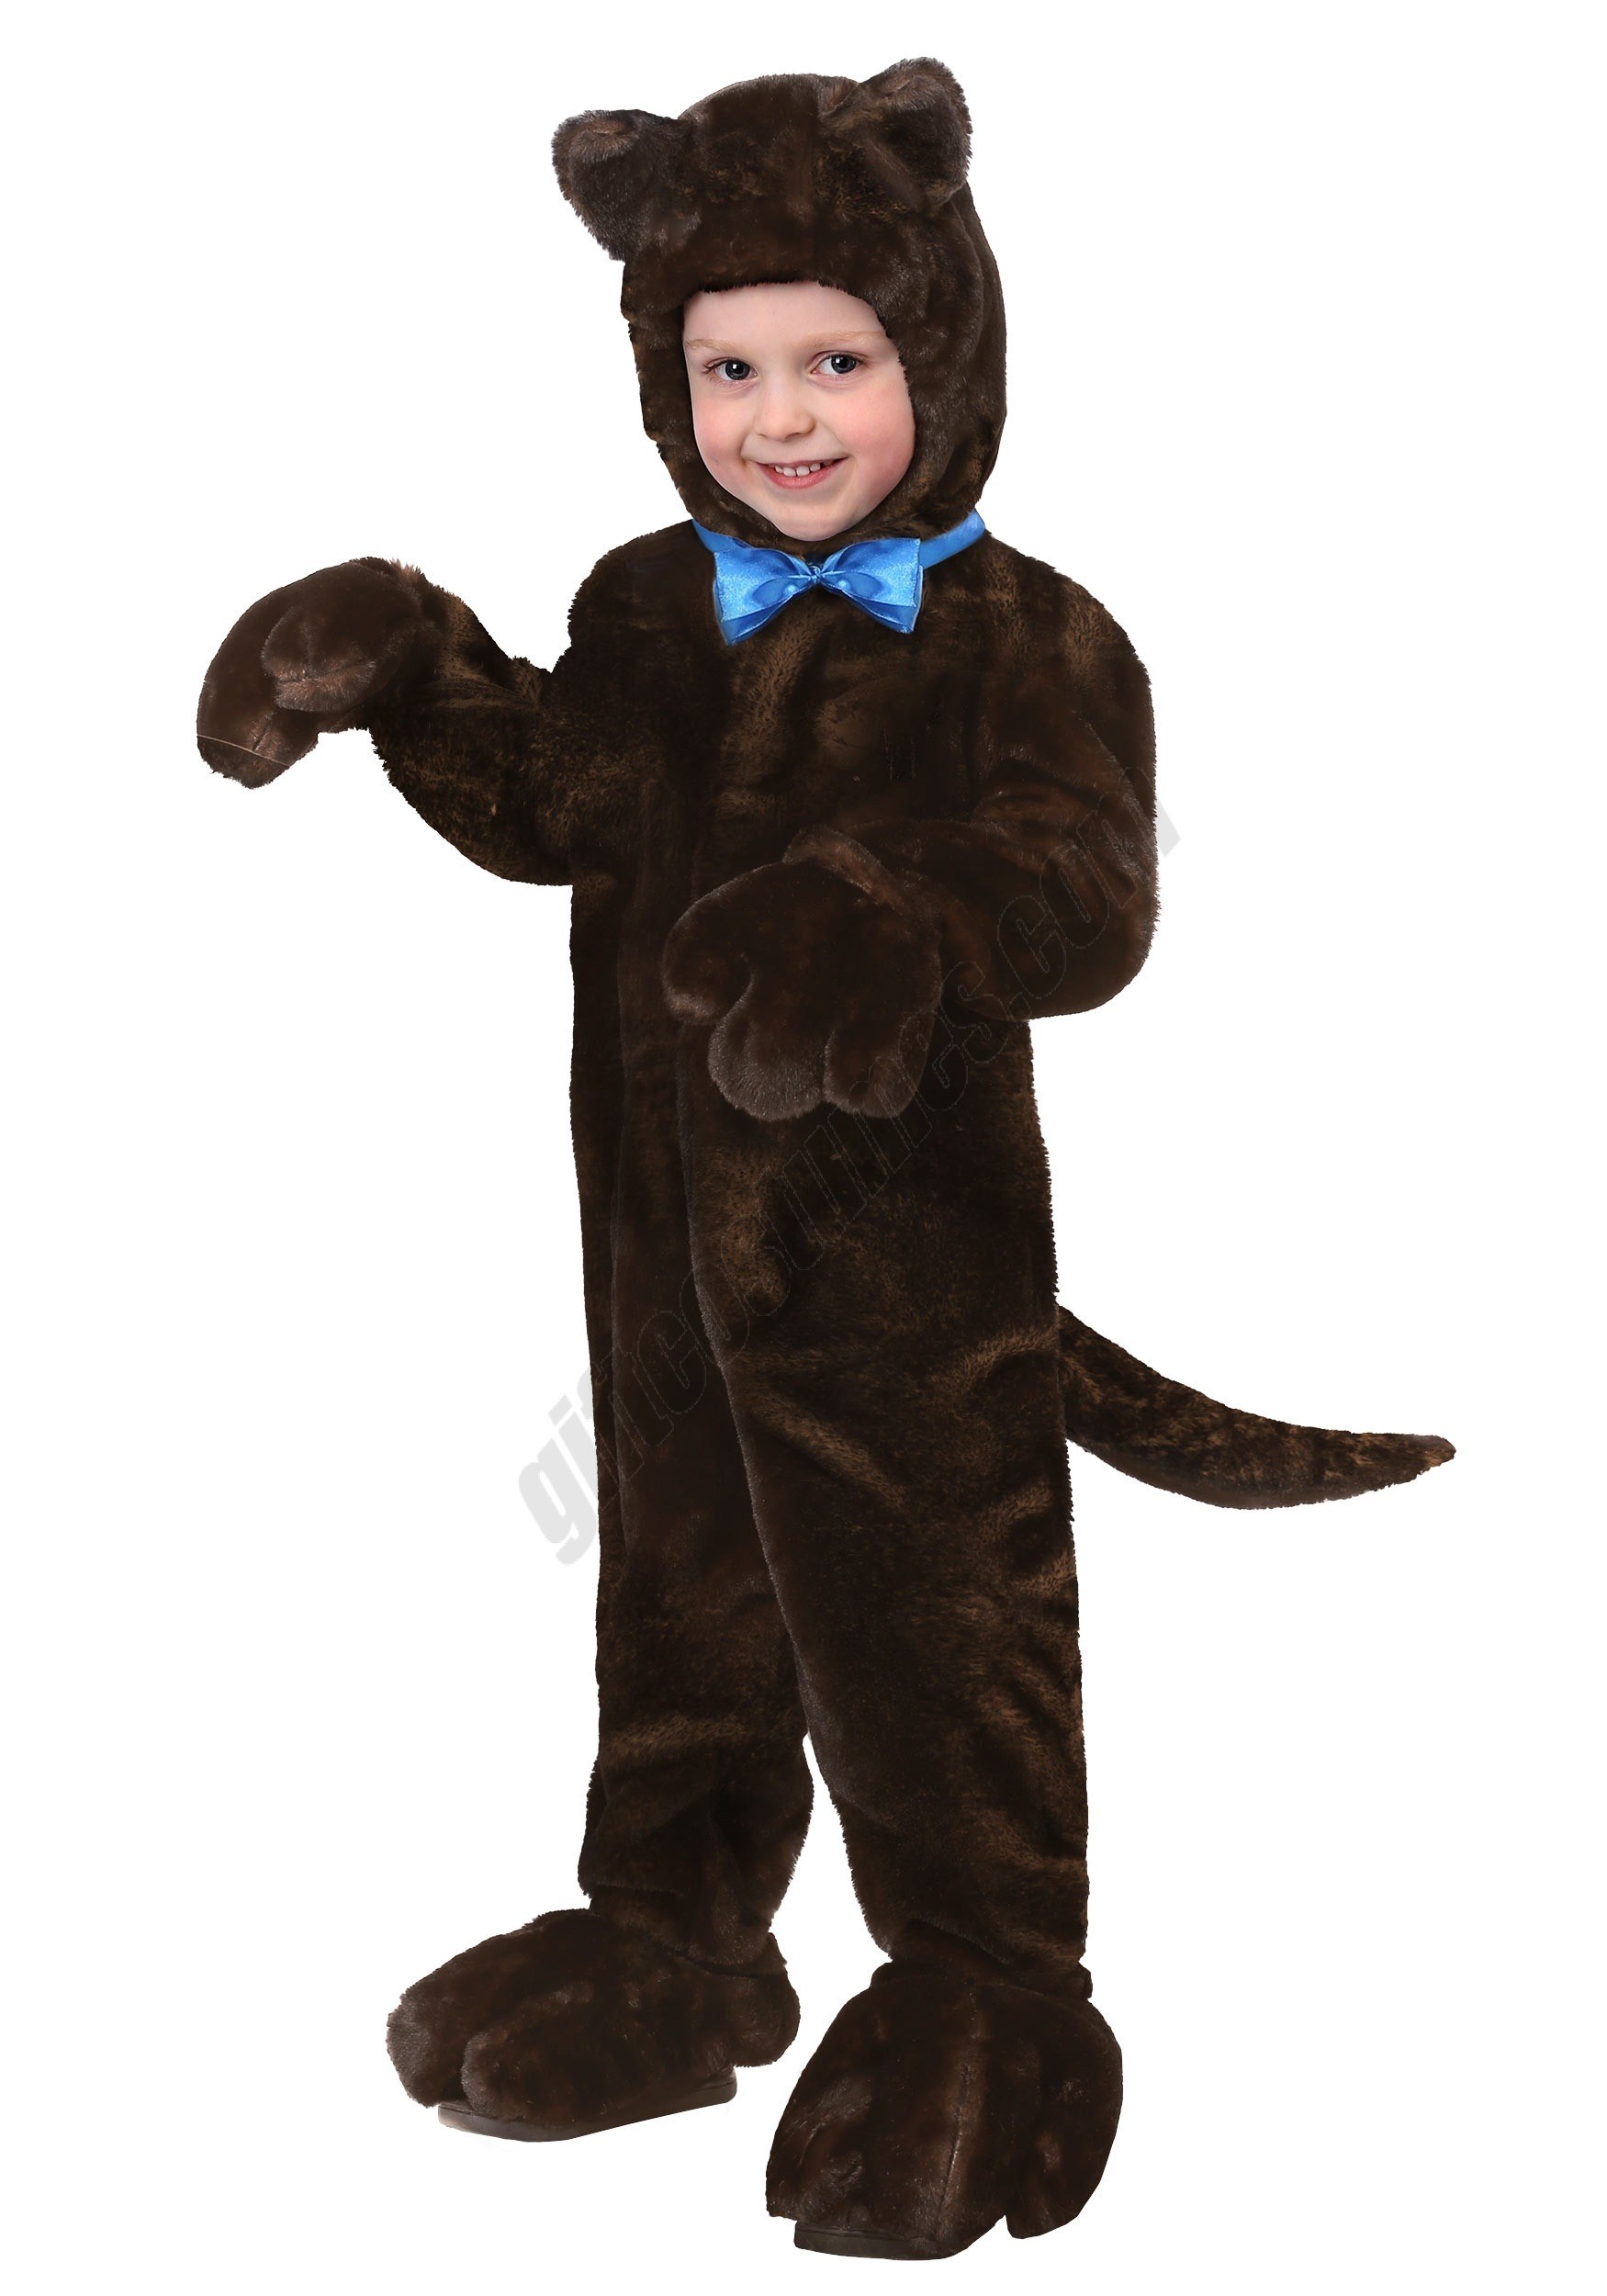 Toddler's Deluxe Brown Dog Promotions - Toddler's Deluxe Brown Dog Promotions